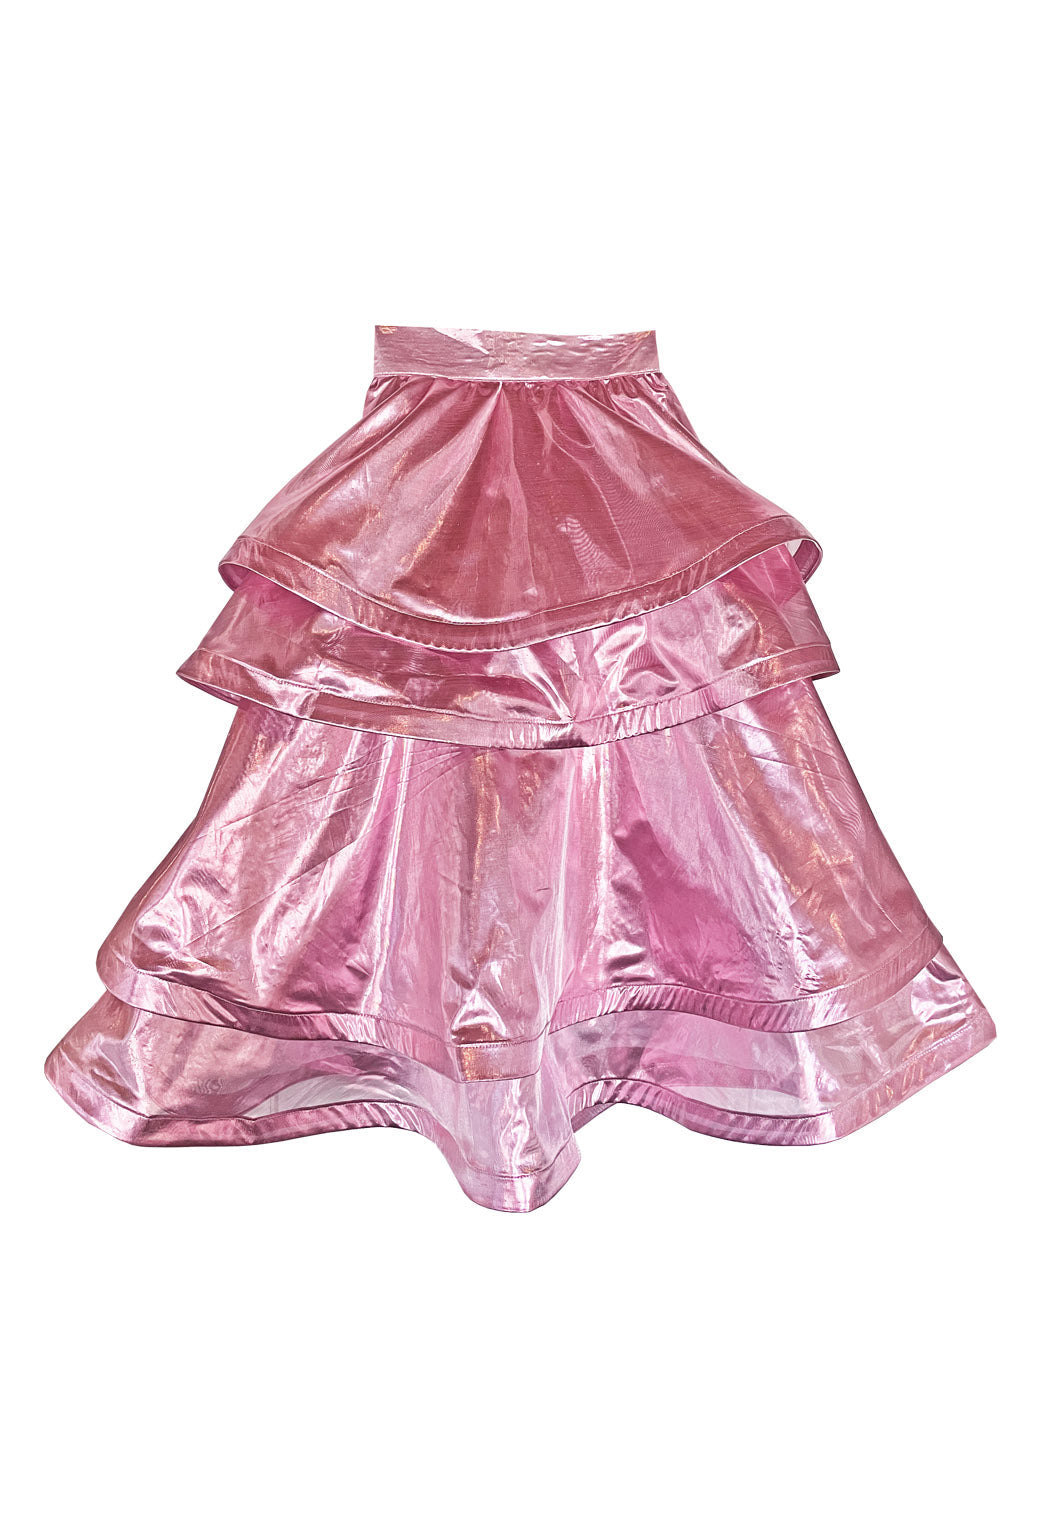 Ruffled Party Skirt - Pink Lamé - PRE ORDER